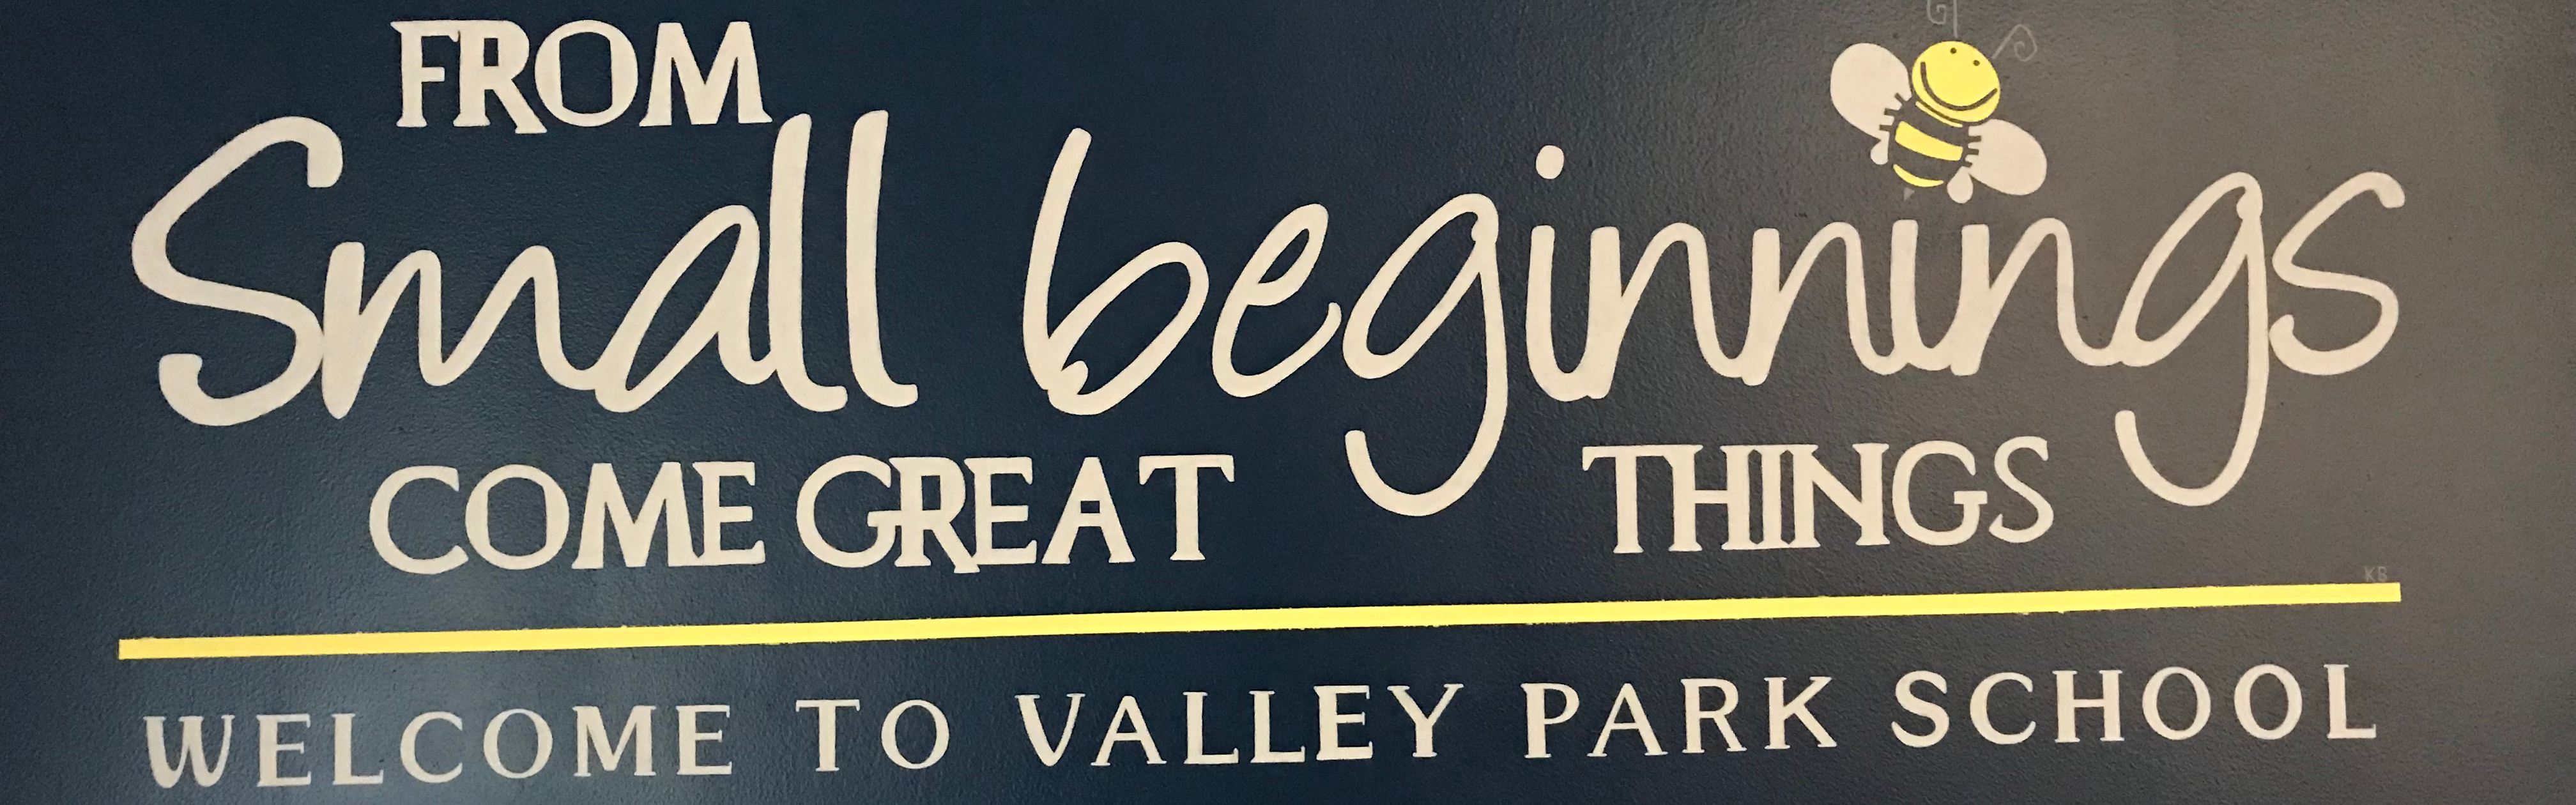 From small beginnings come great things. Welcome to Valley Park School